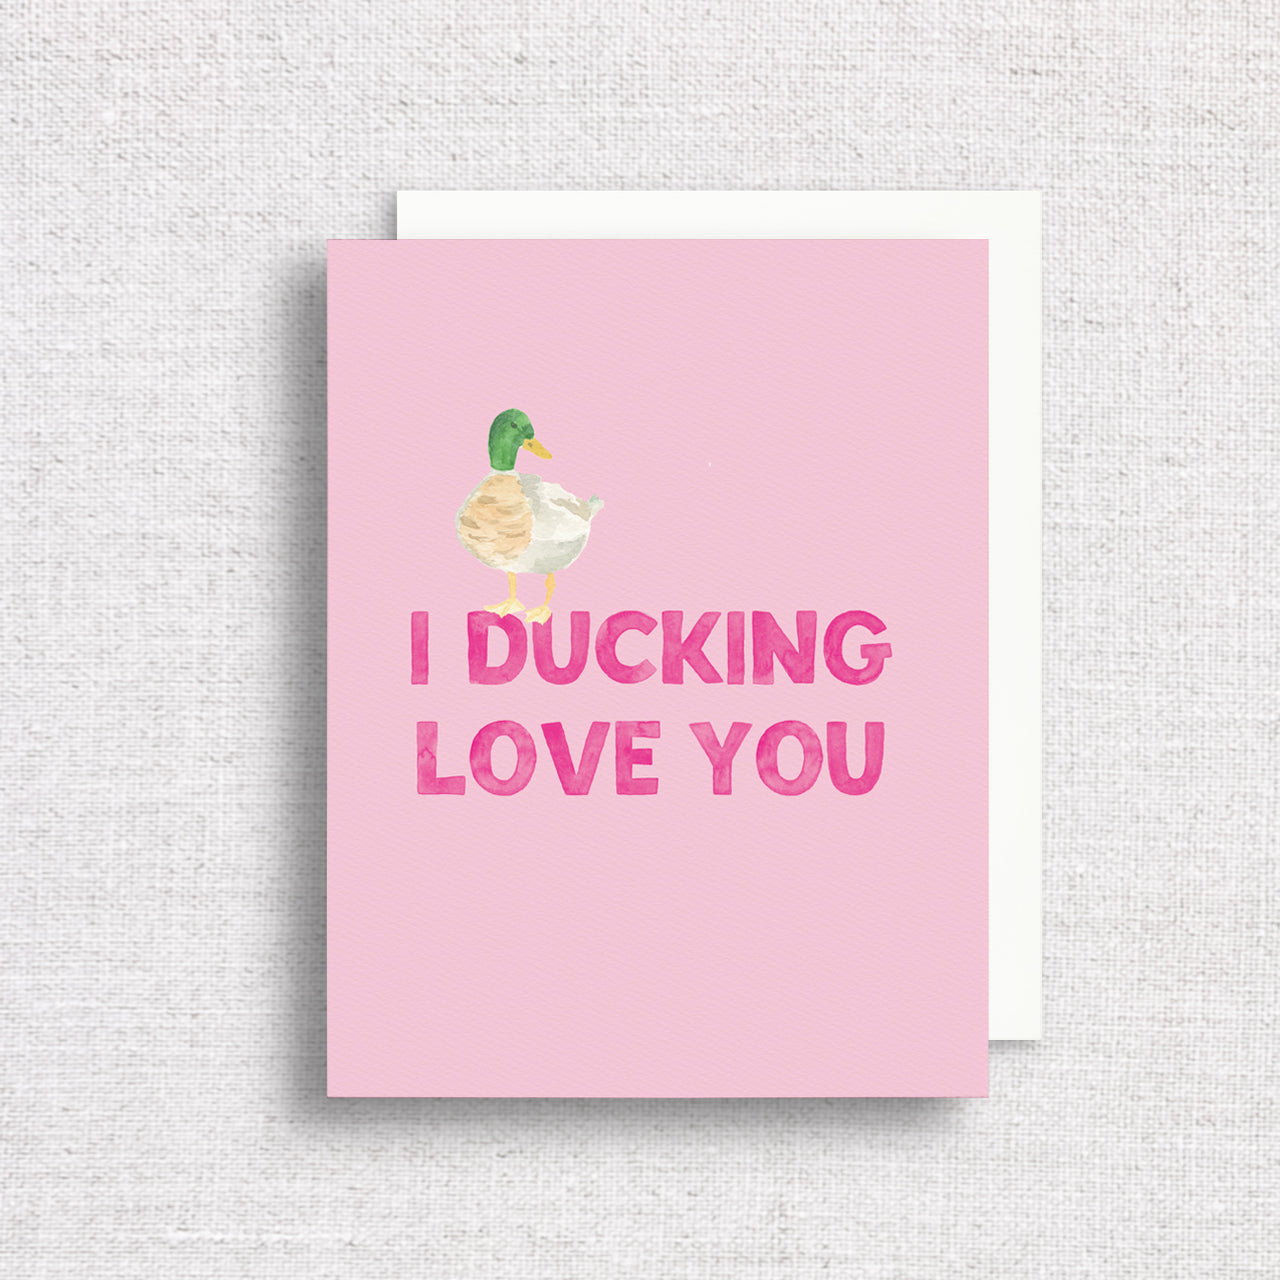 I Ducking Love You Greeting Card by Gert & Co